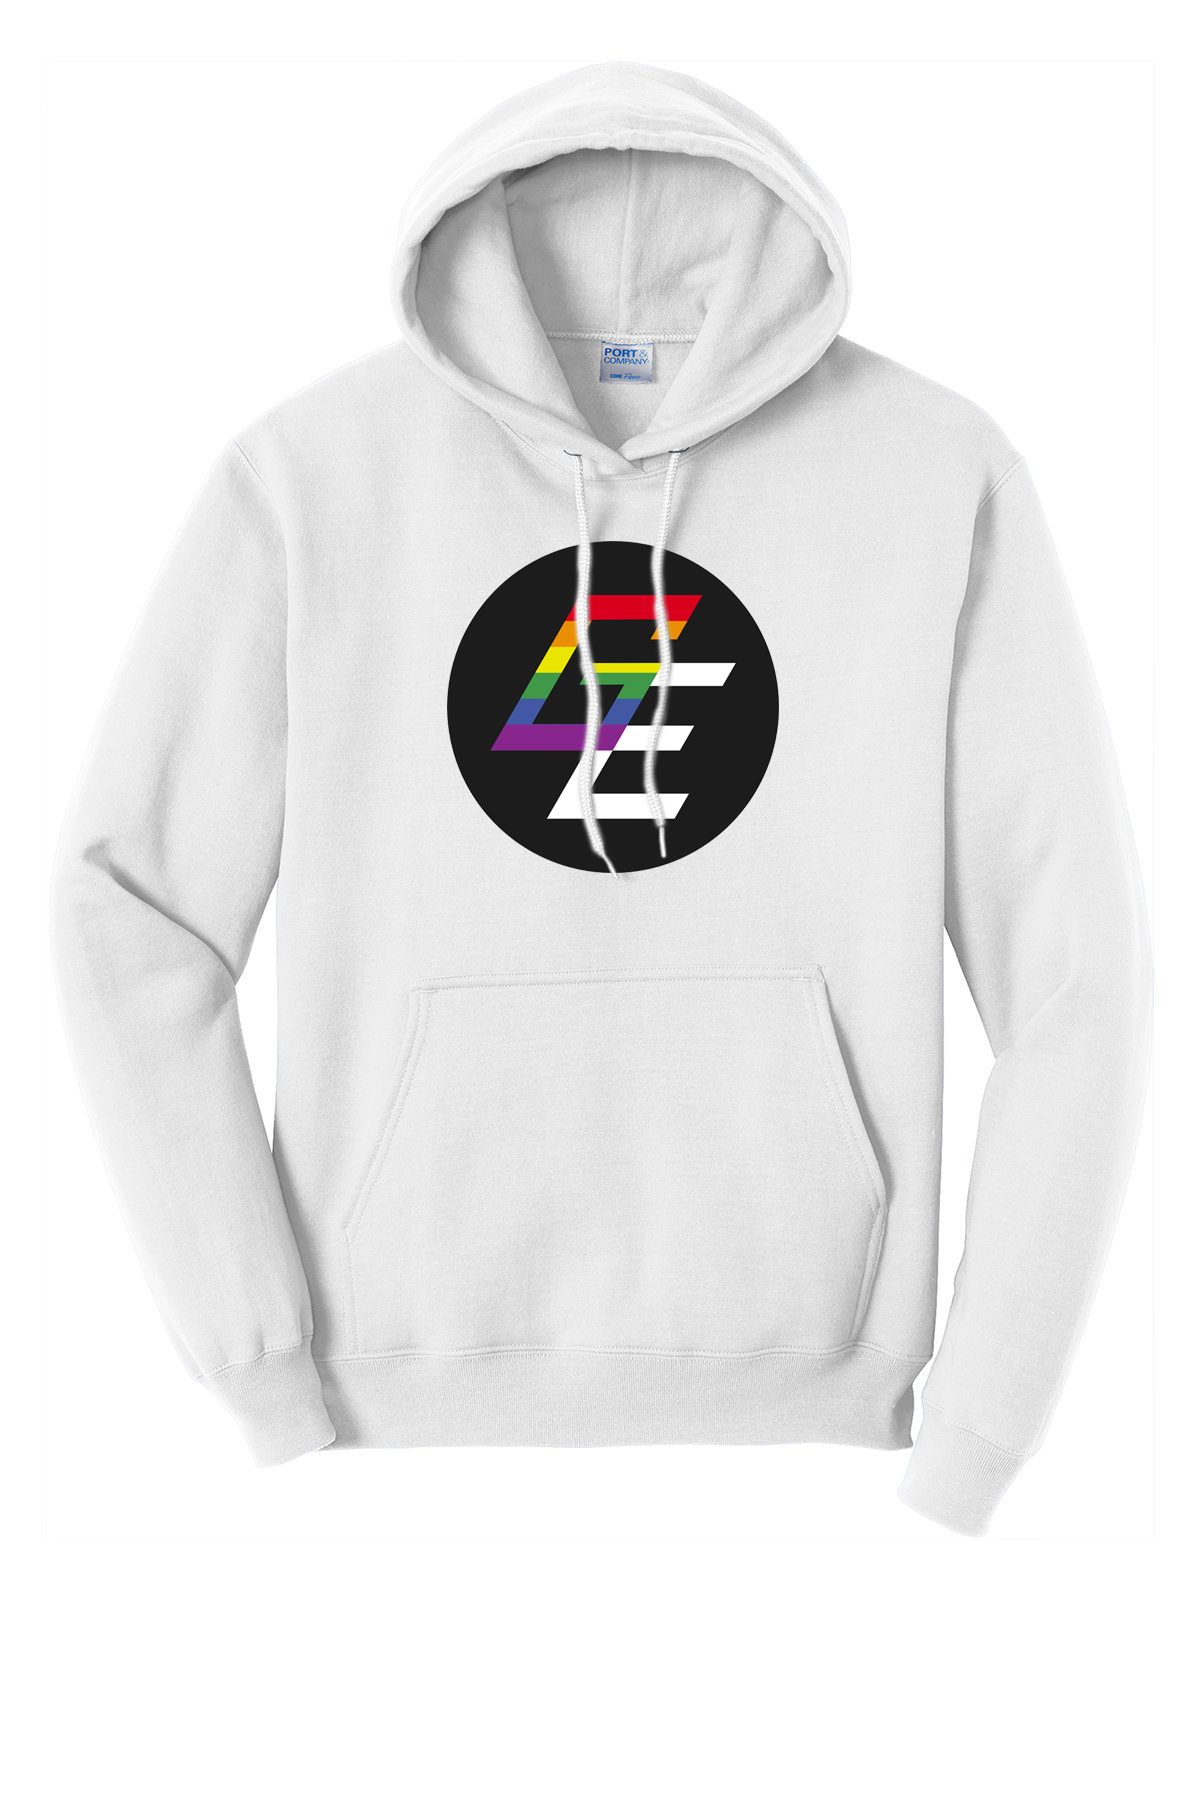 Gaming and Esports Club at Iowa State | DTF | Pullover Hoodie